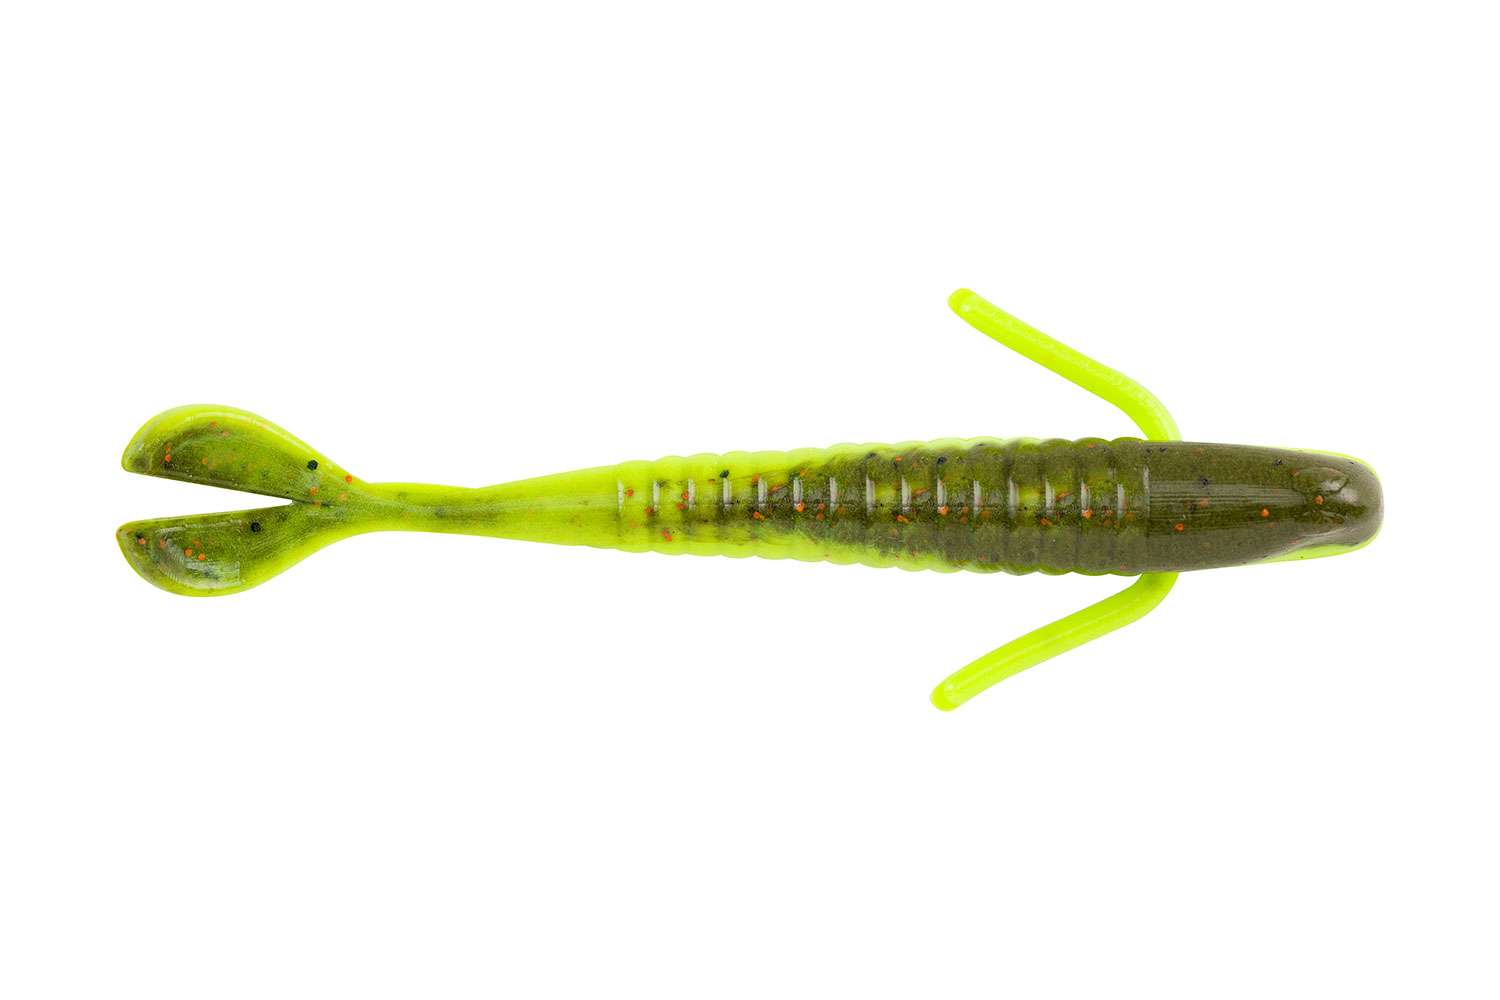    <B>Berkley PowerBait Water Bug </B>
<BR>Designed by Mike Iaconelli, the Water Bug has small arms to add subtle quivering actions paired with a scooped tall to catch more water finesse causing a subtle wave action. The Water Bug works well rigged for drop shots, Ned rig on a jighead or on a micro skirted jig and comes in 12 colors.
